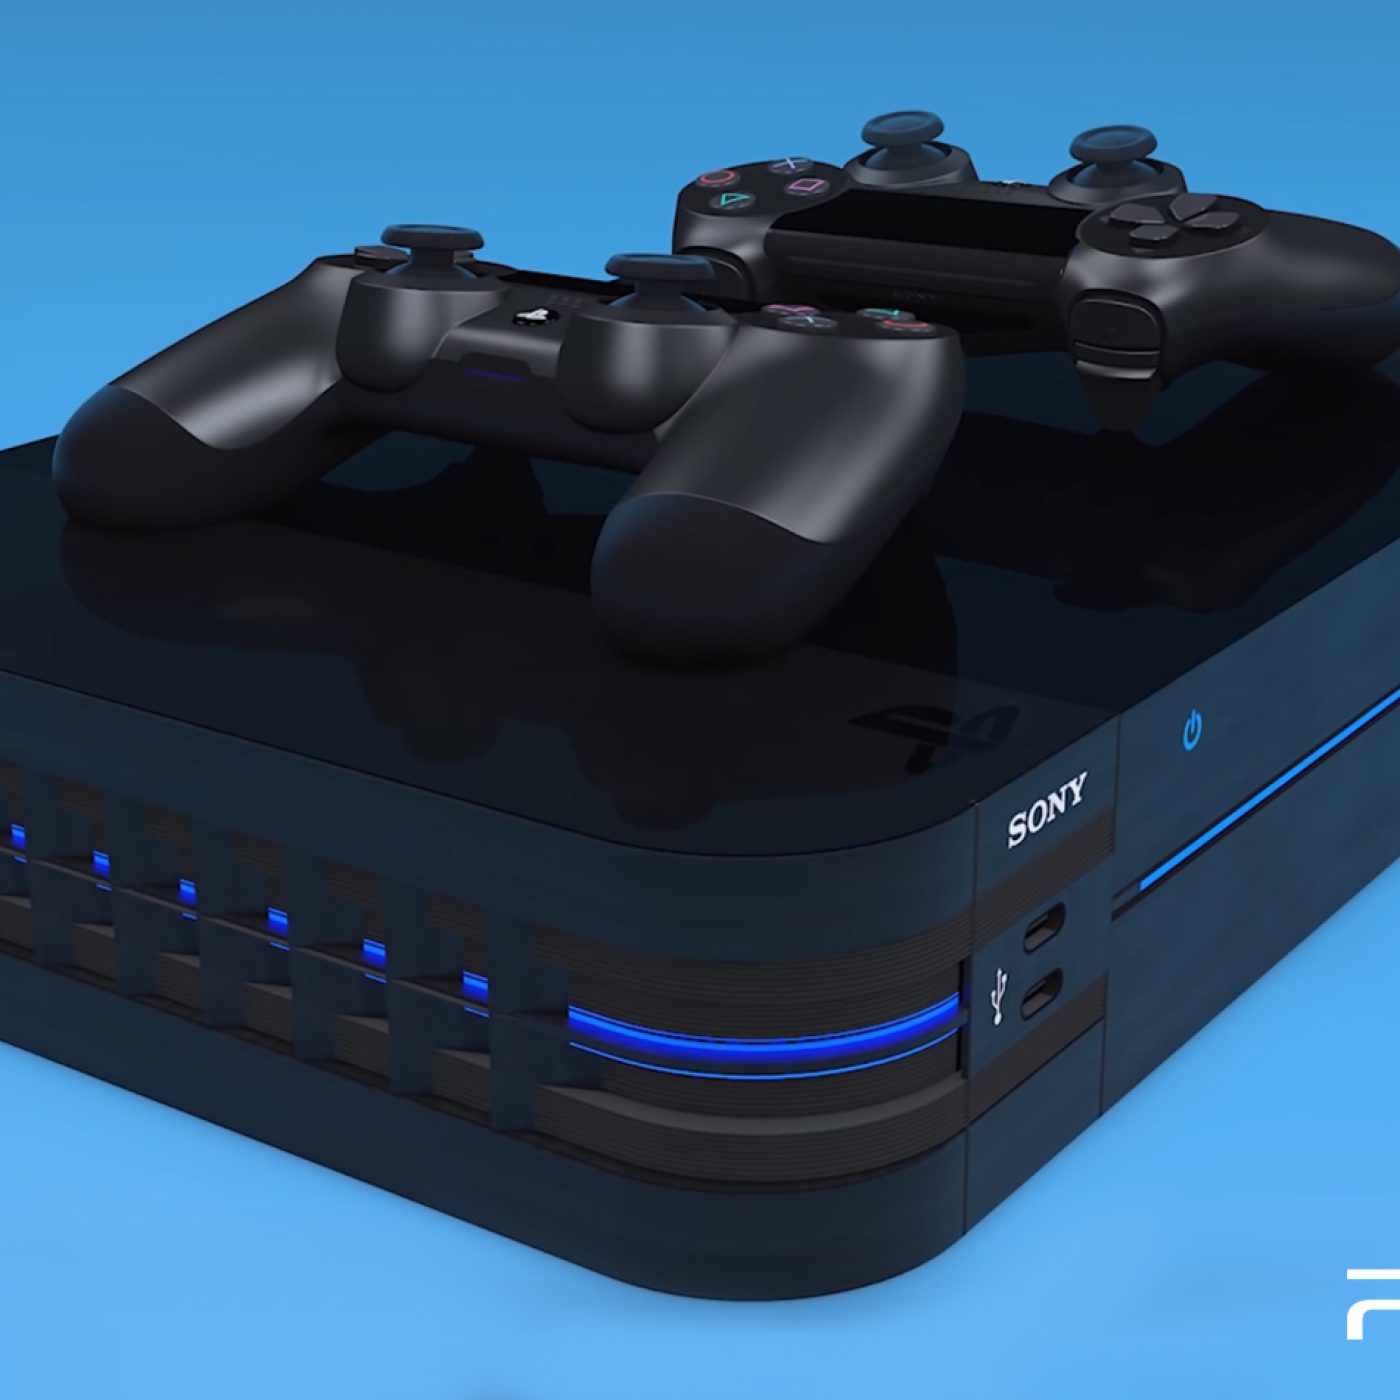 This Sony PlayStation 5 Pro concept has the PS5 DNA